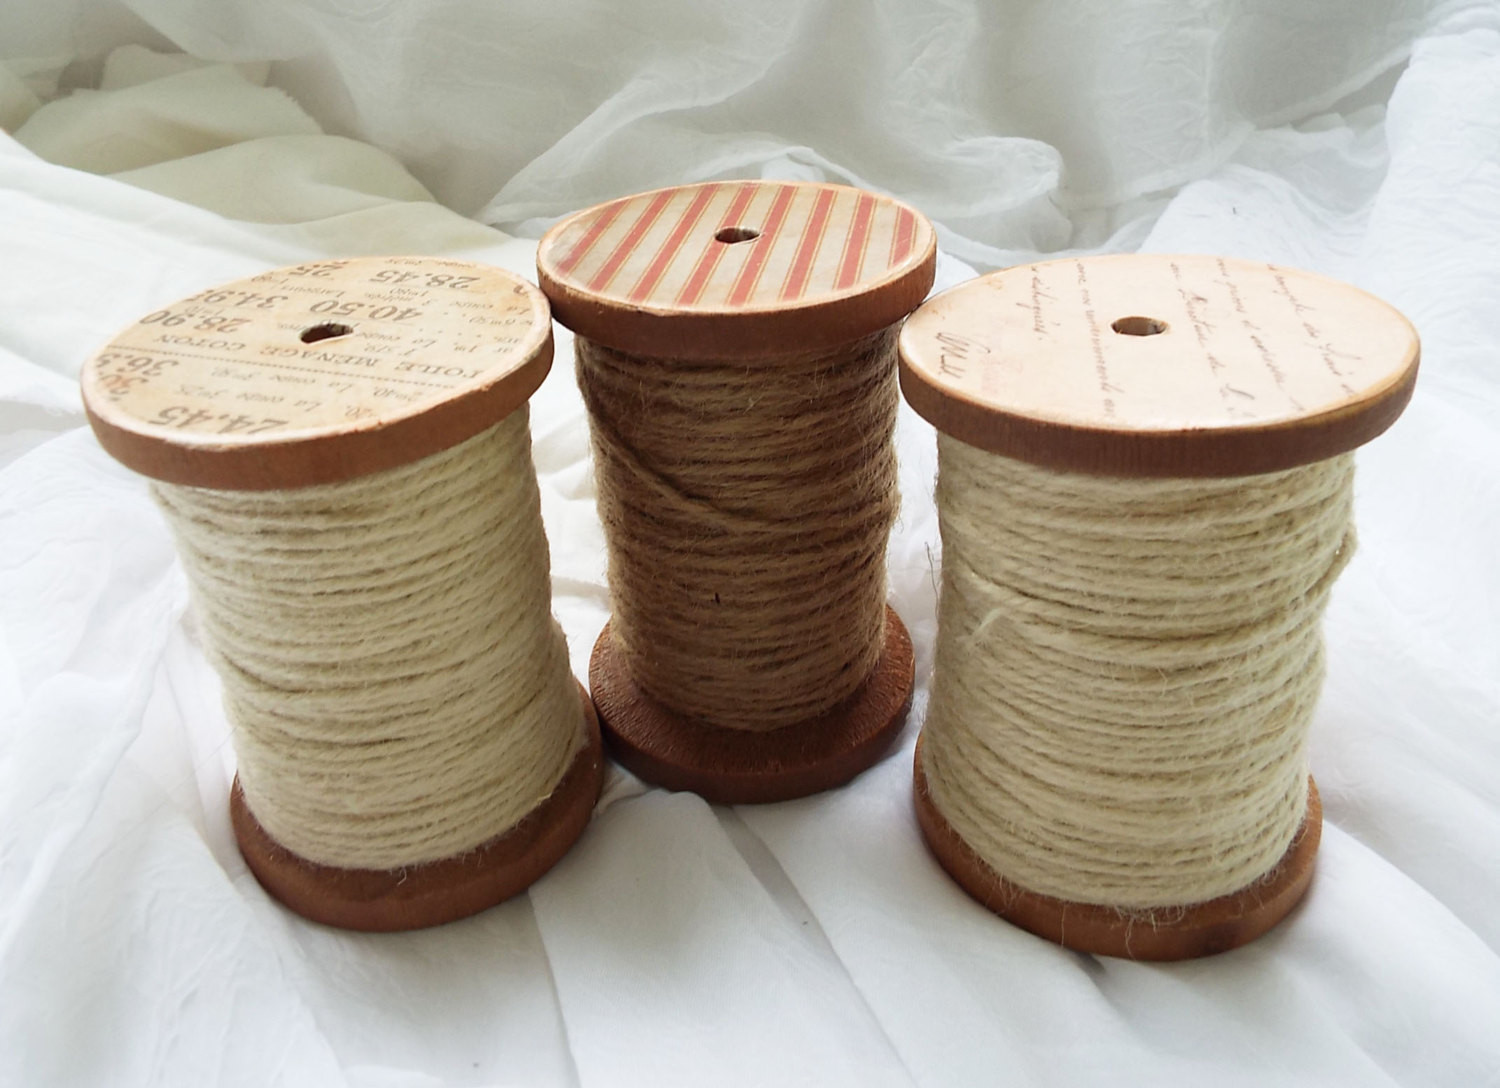 Wooden Spool Craft Ideas
 Wooden Spools Twine Craft Projects or Display for Home Decor